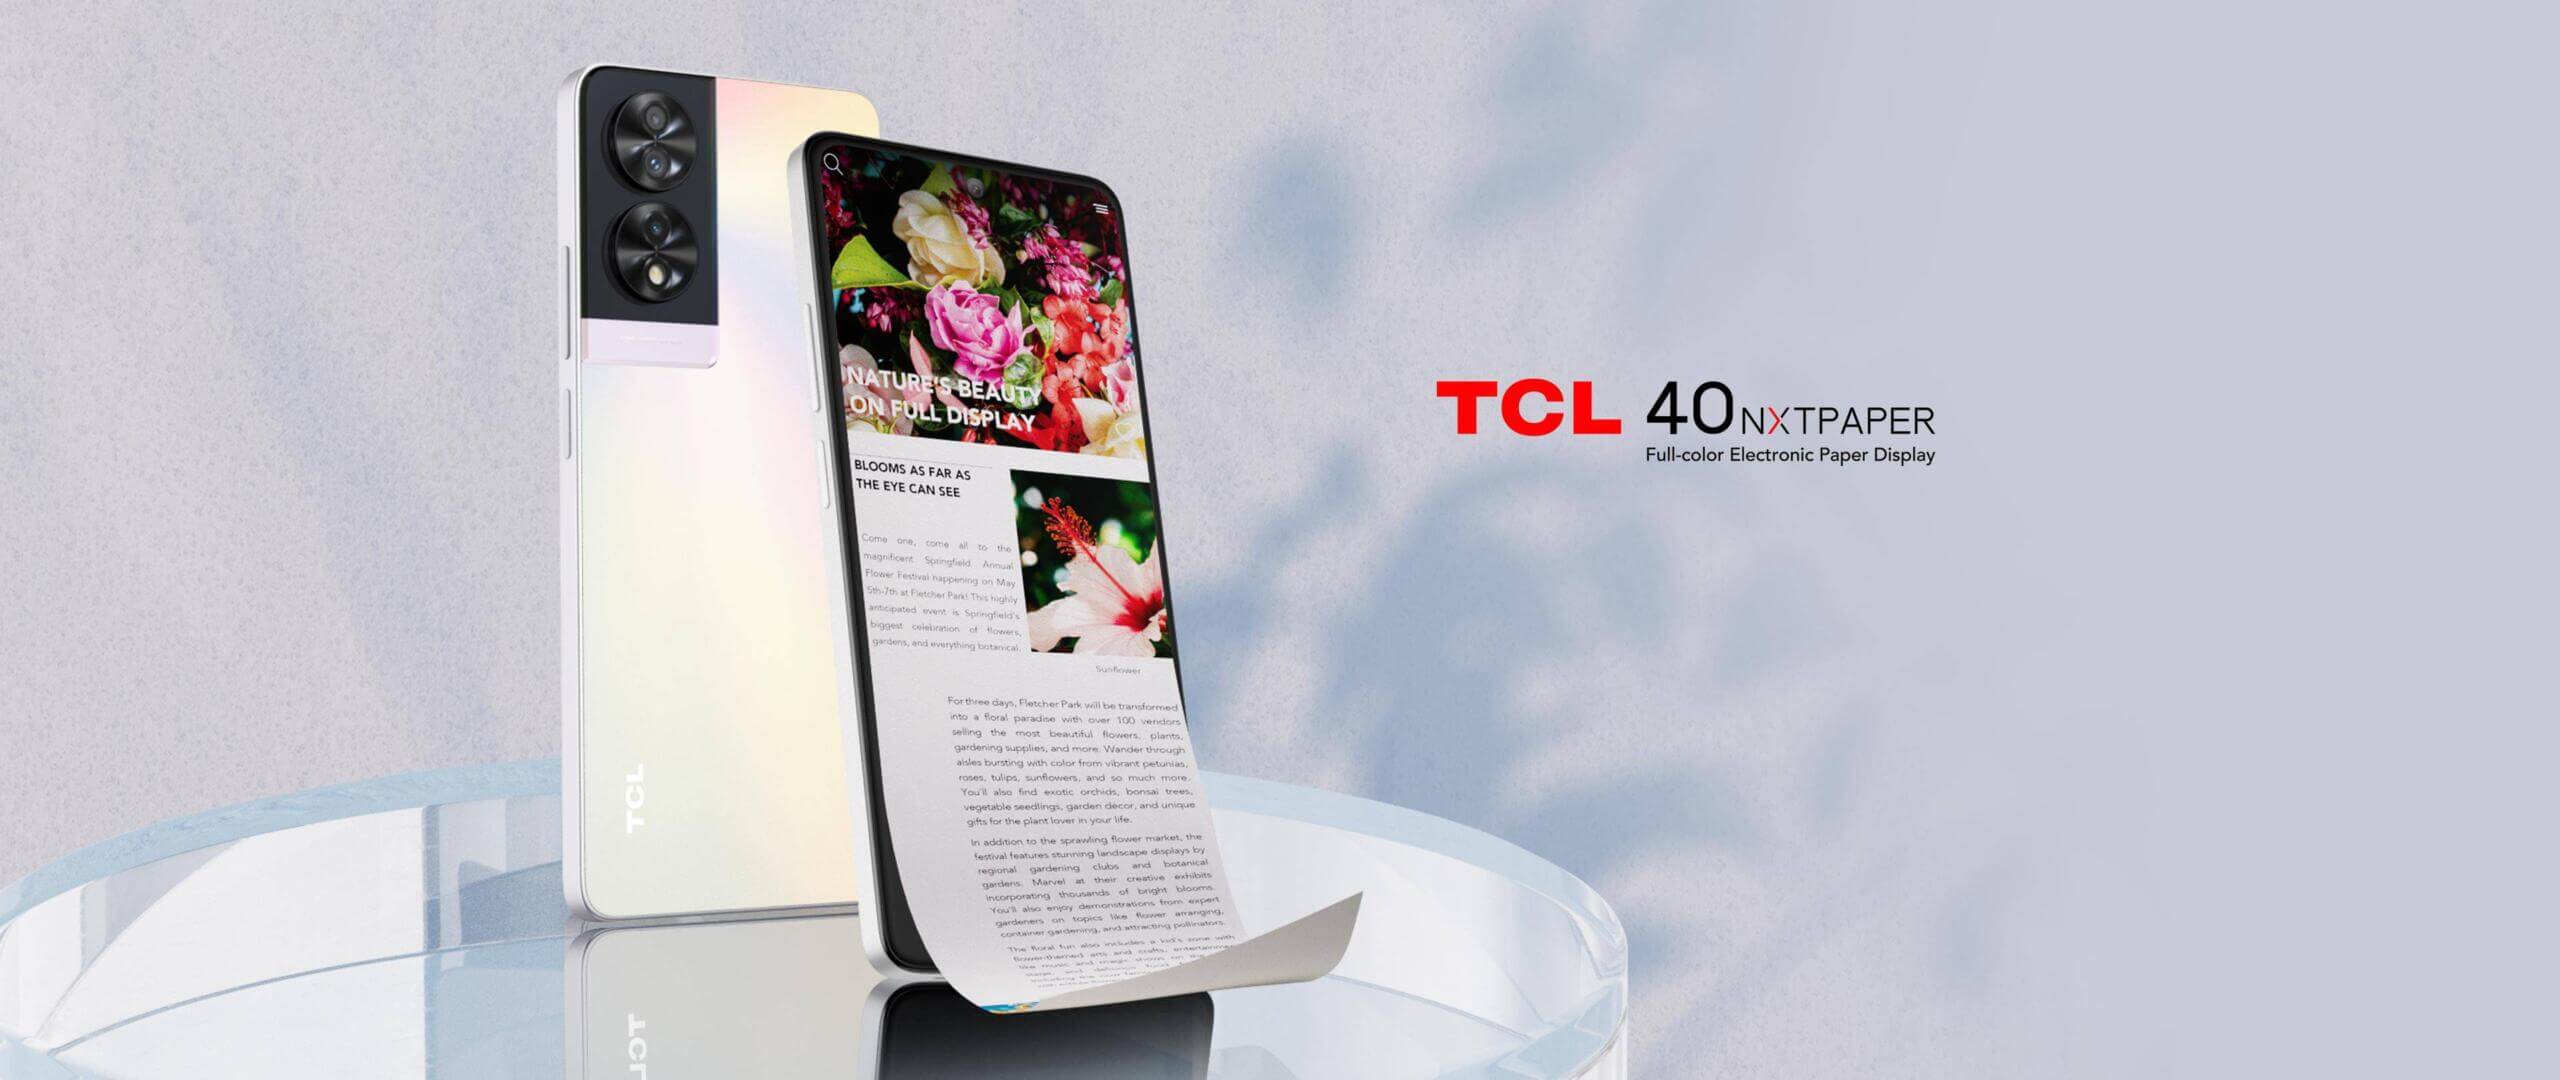 Review - TCL 40 NXTPAPER 5G: The perfect phone for e-book readers